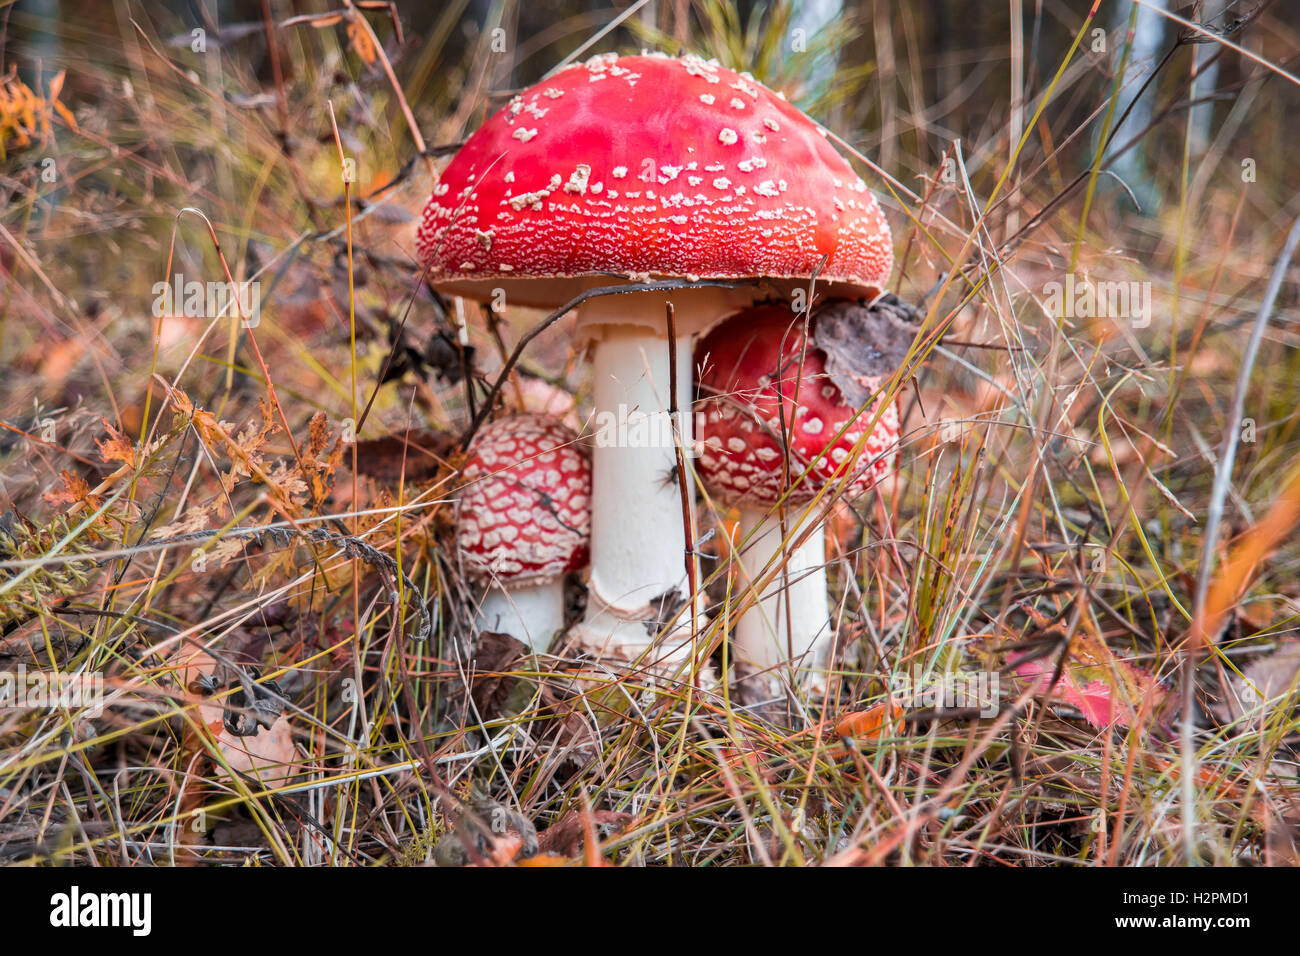 Fly-agaric in a forest, closeup mushroom in the grows Stock Photo